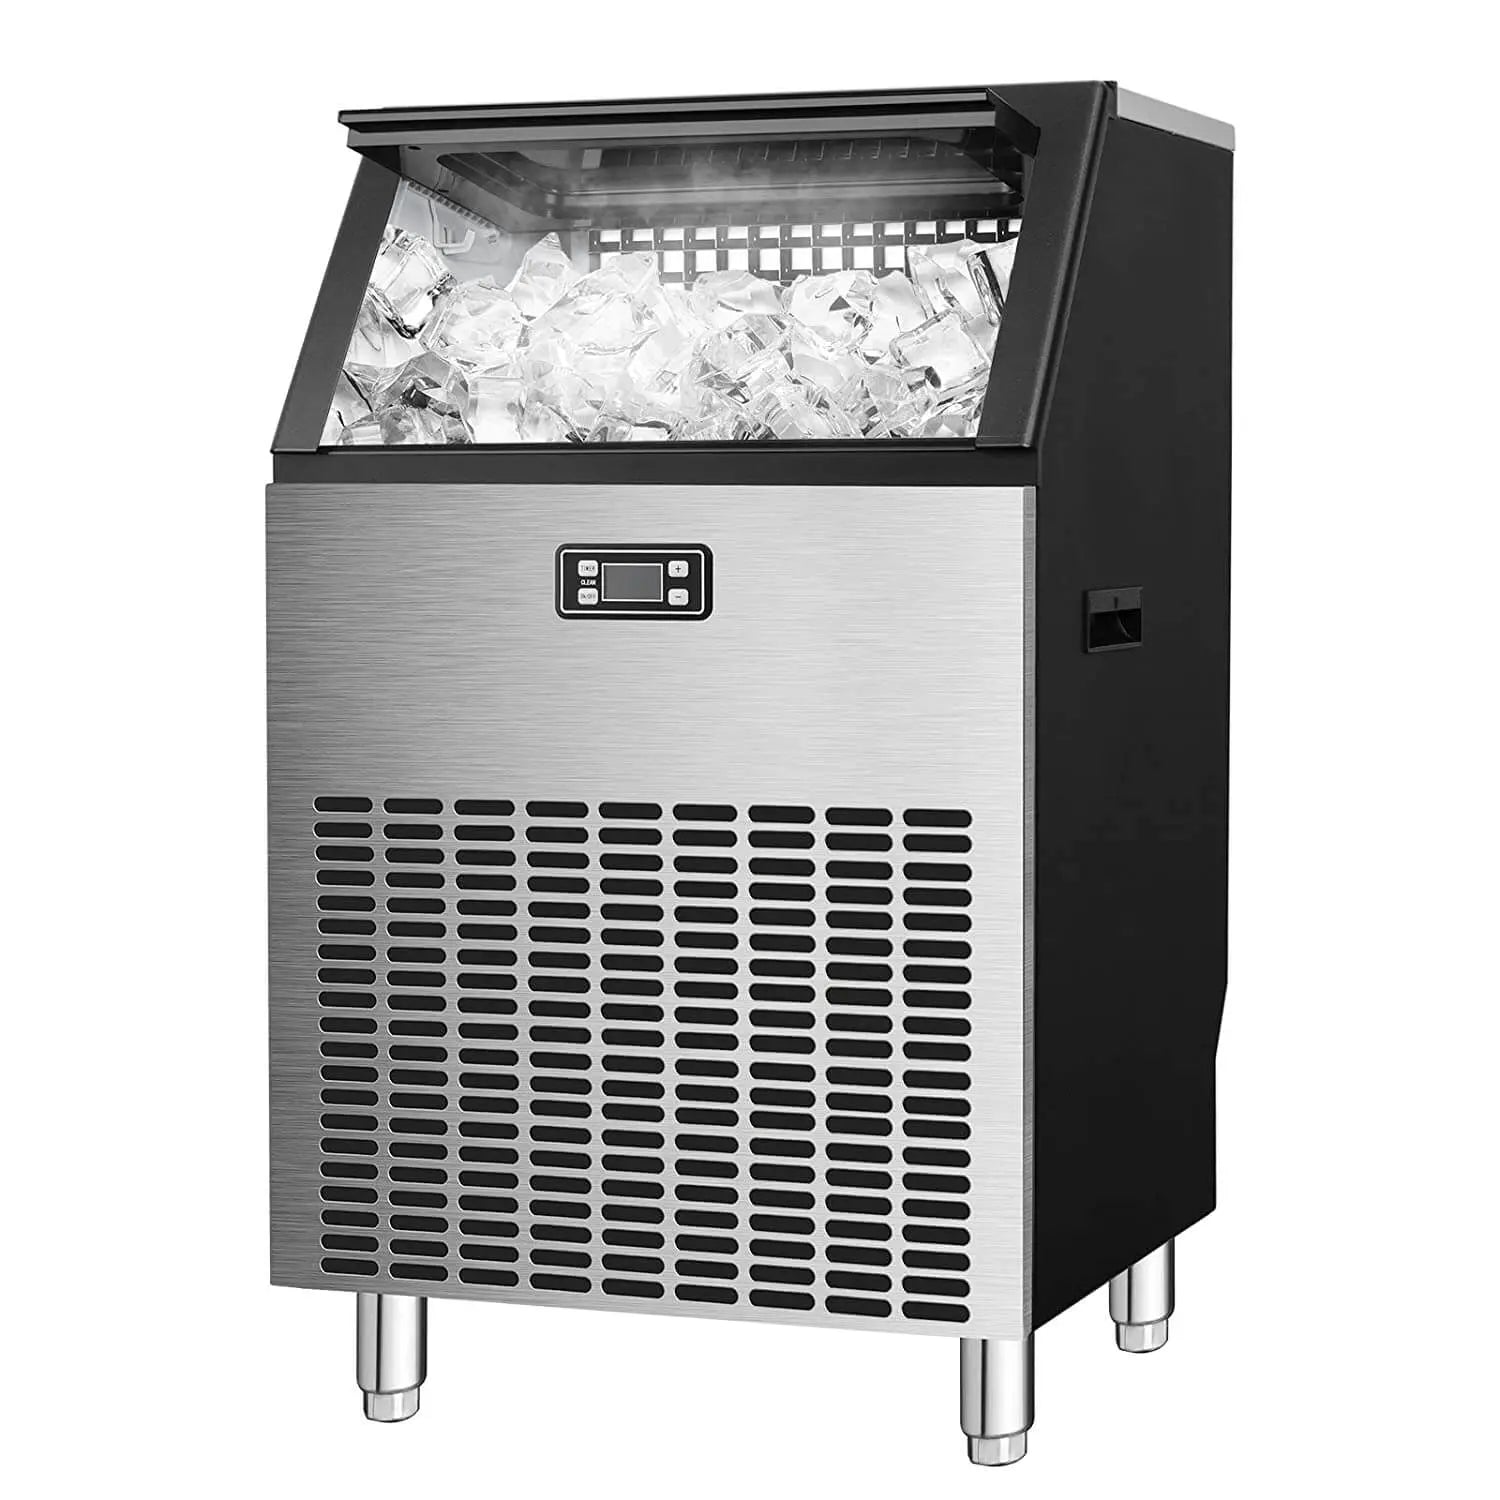 AGLUCKY Commercial Ice Maker Machine,Freestanding